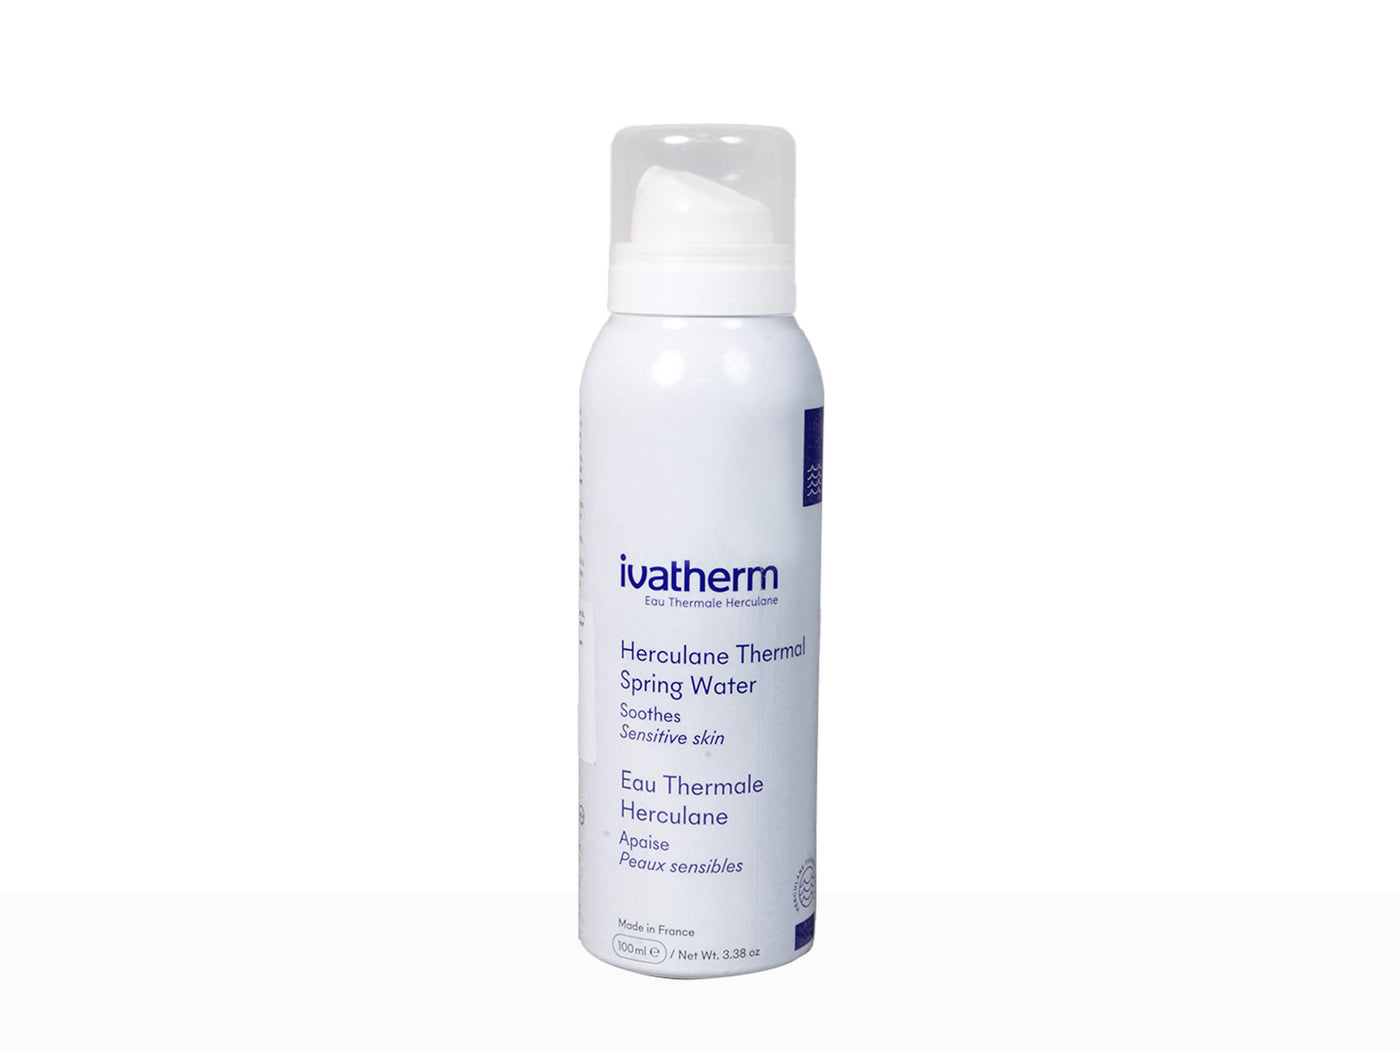 Ivatherm Herculane Thermal Spring Water - Clinikally